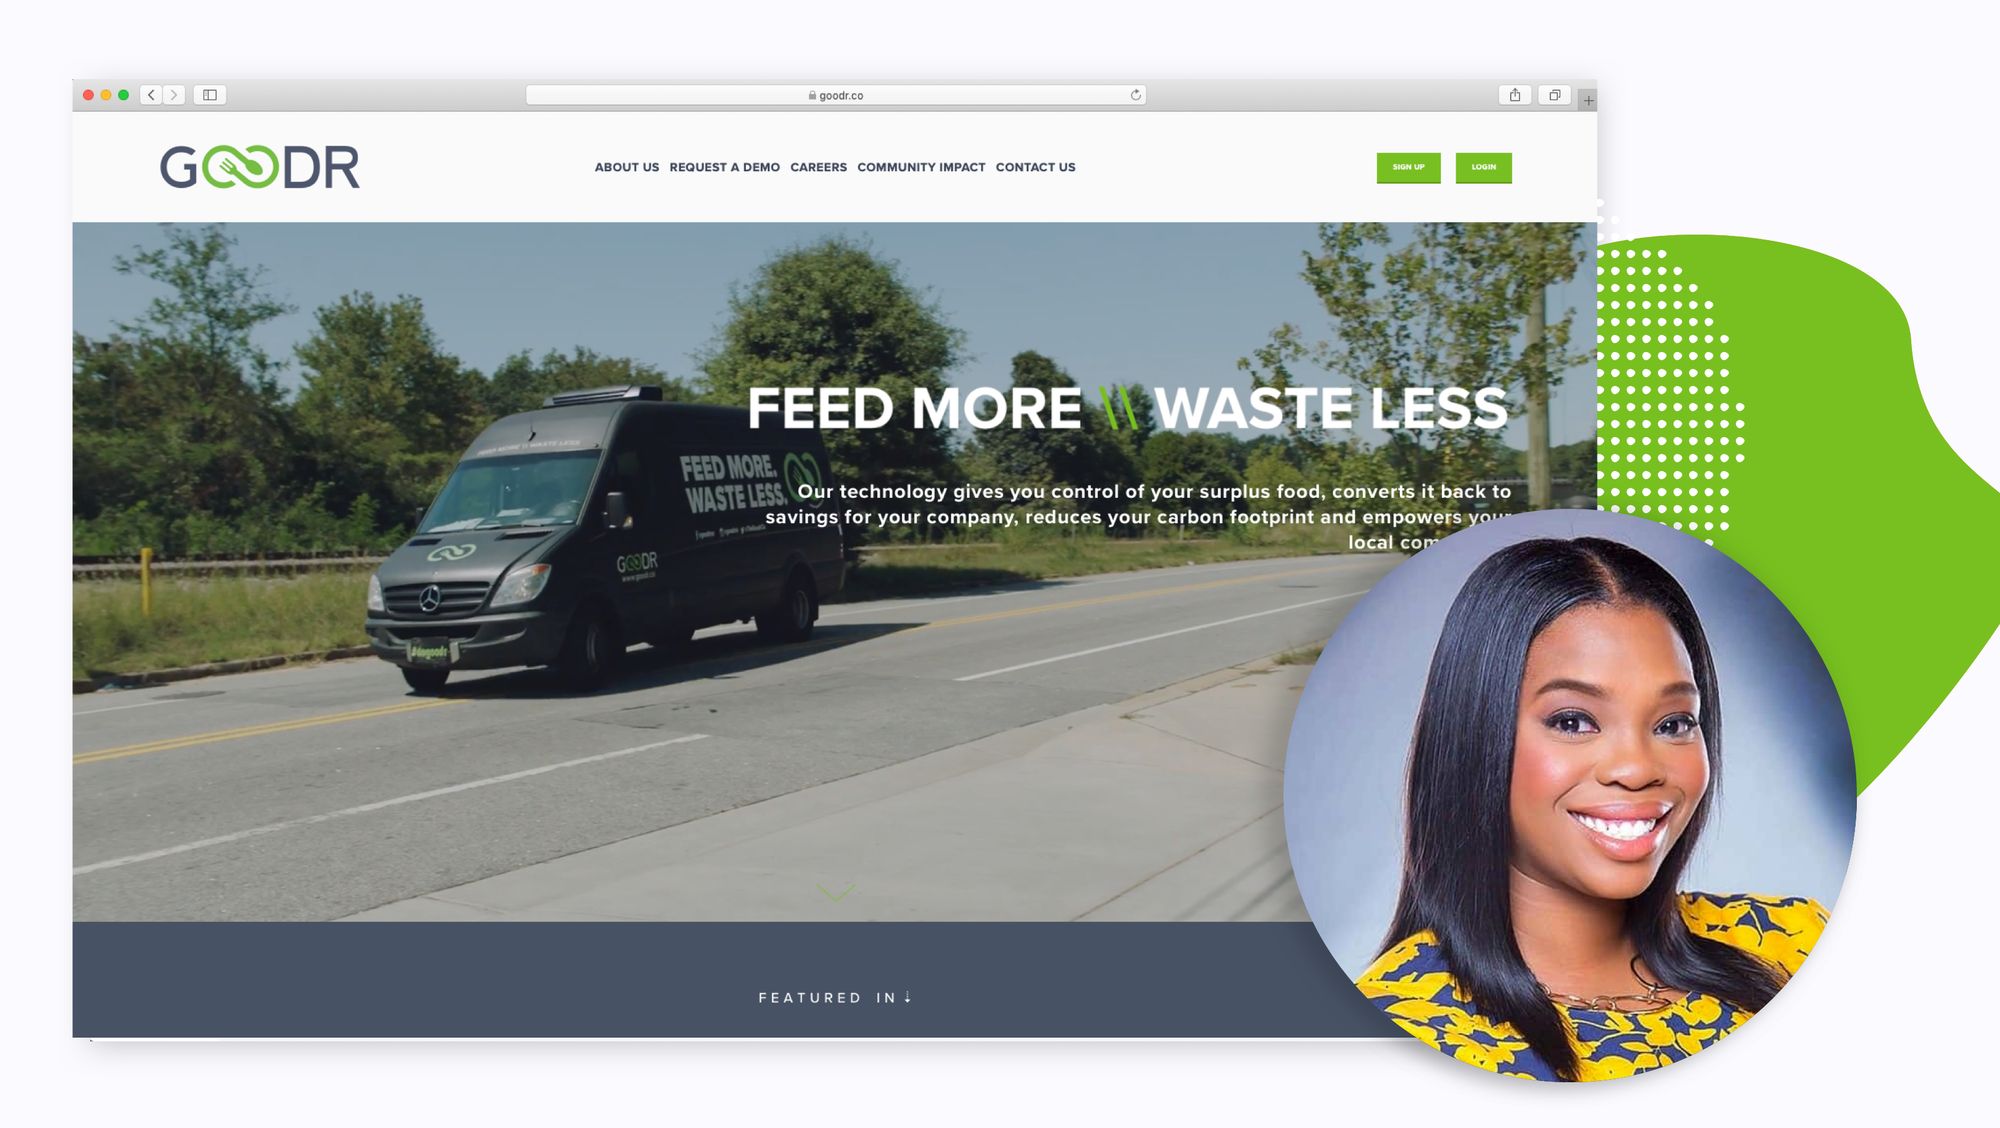 Goodr homepage - feed more, waste less